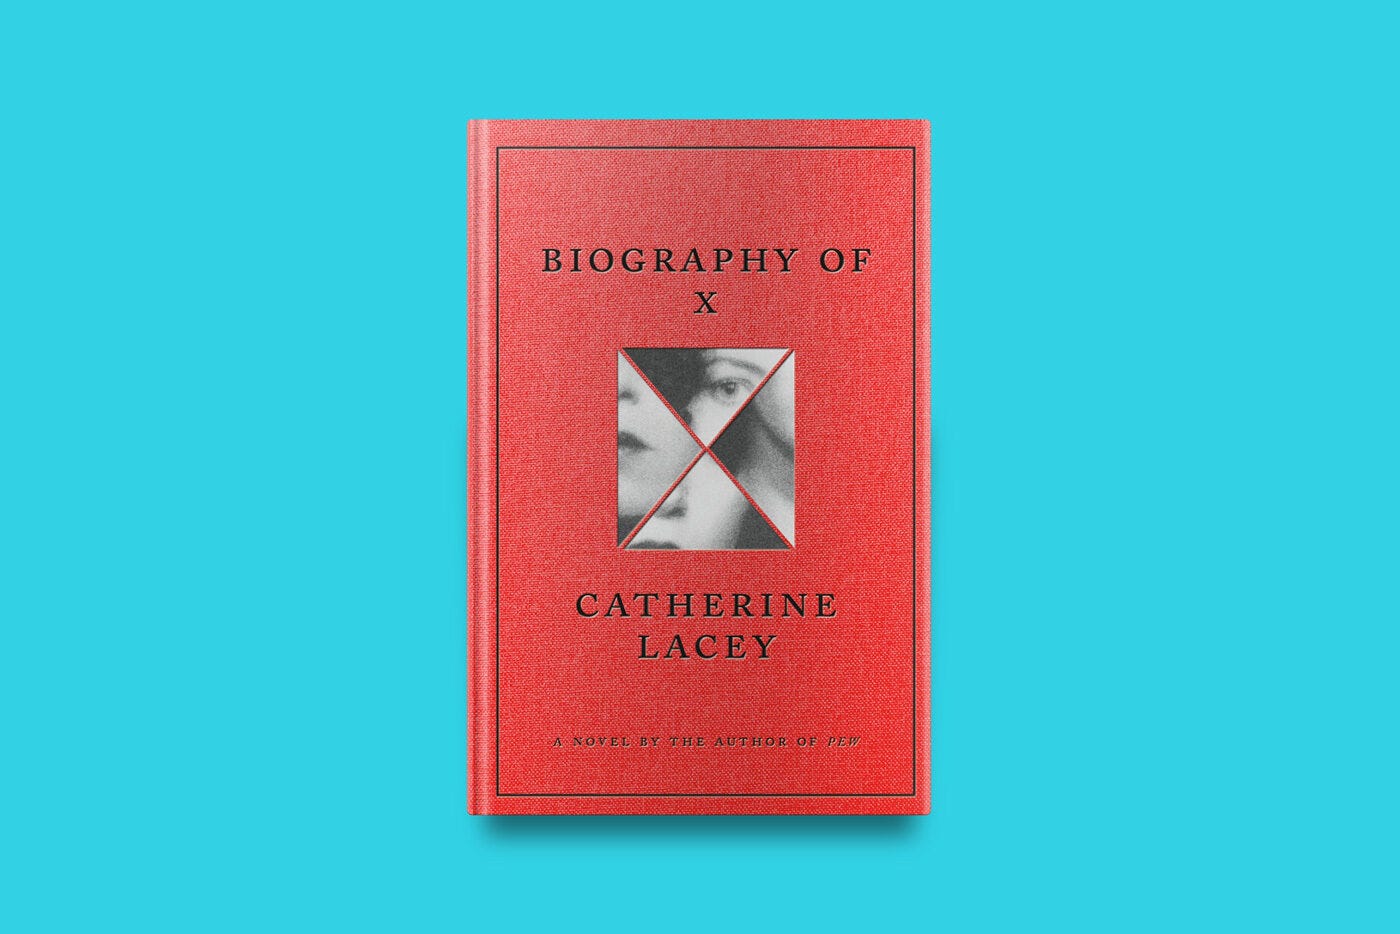 BOMB Magazine | Catherine Lacey's Biography of X